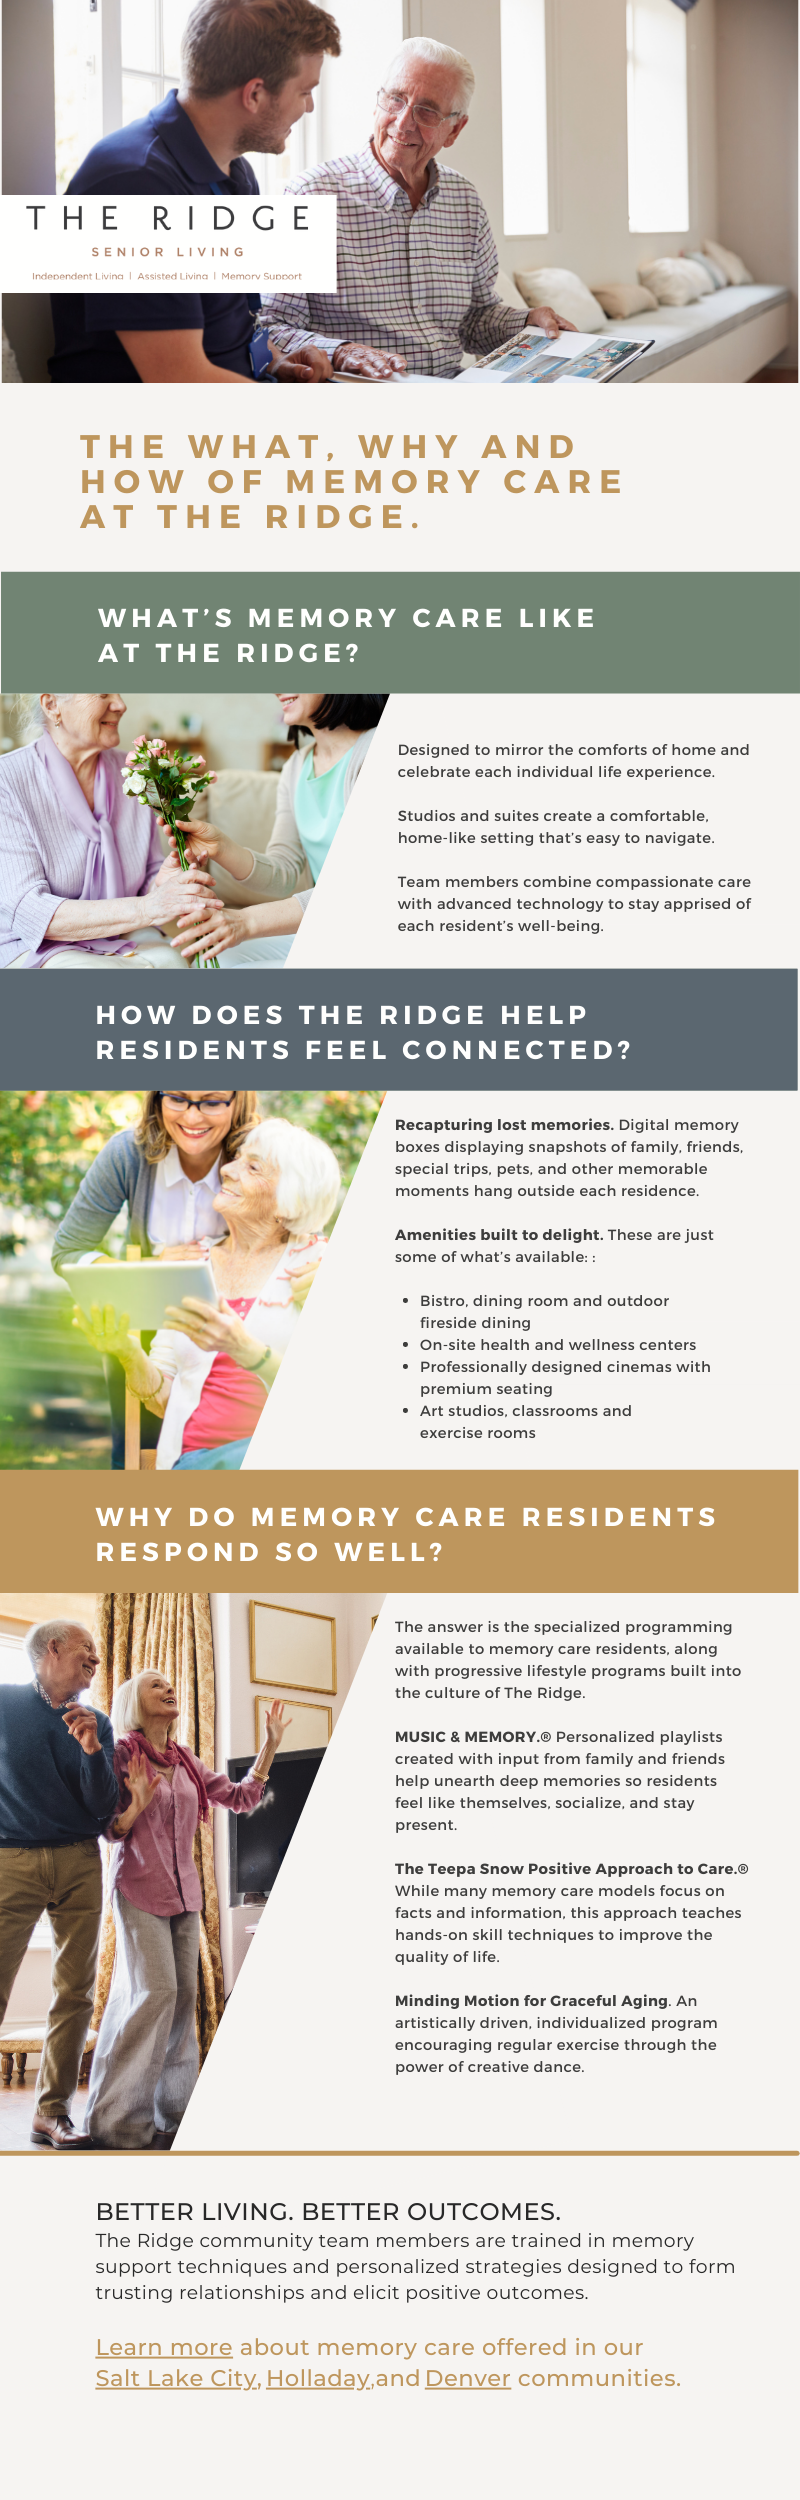 infographic about what it's like living in memory care